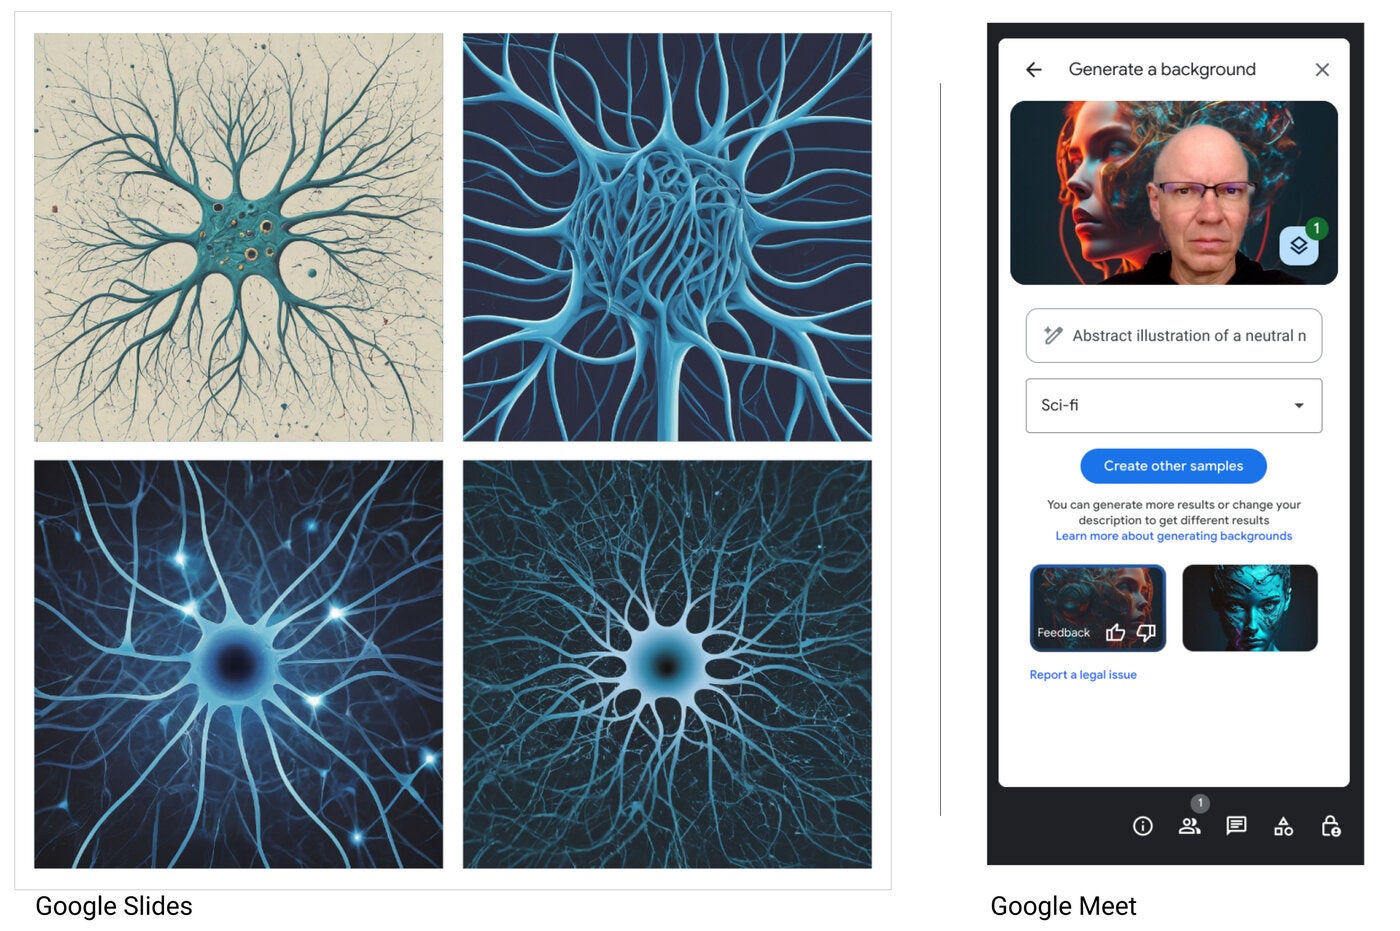 Abstract illustration images generated by Gemini in Google Slides (left) and Google Meet (right).